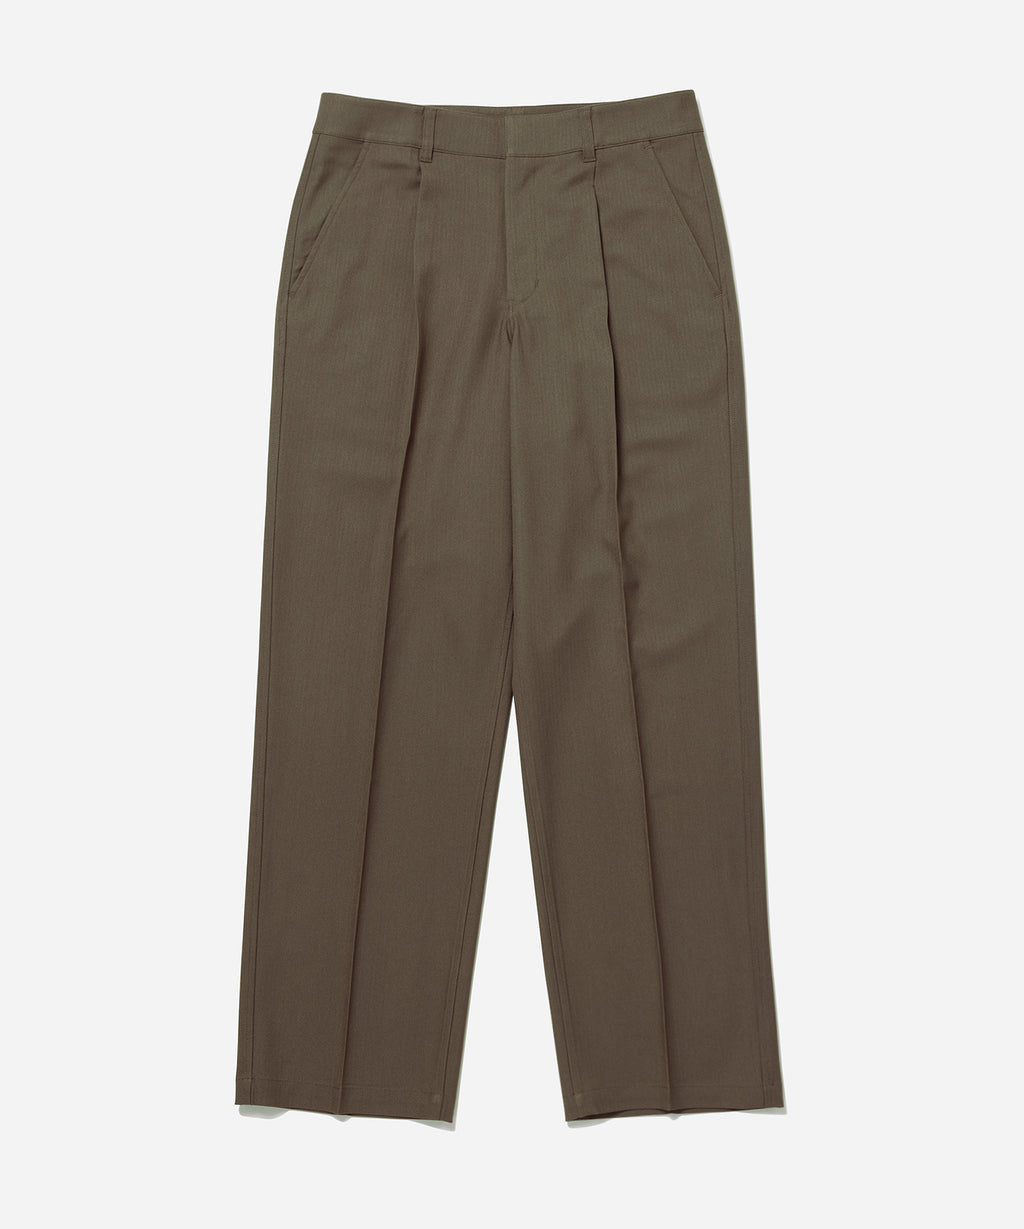 All the Details: orSlow Slim Fit Army Trousers | Canoe Club